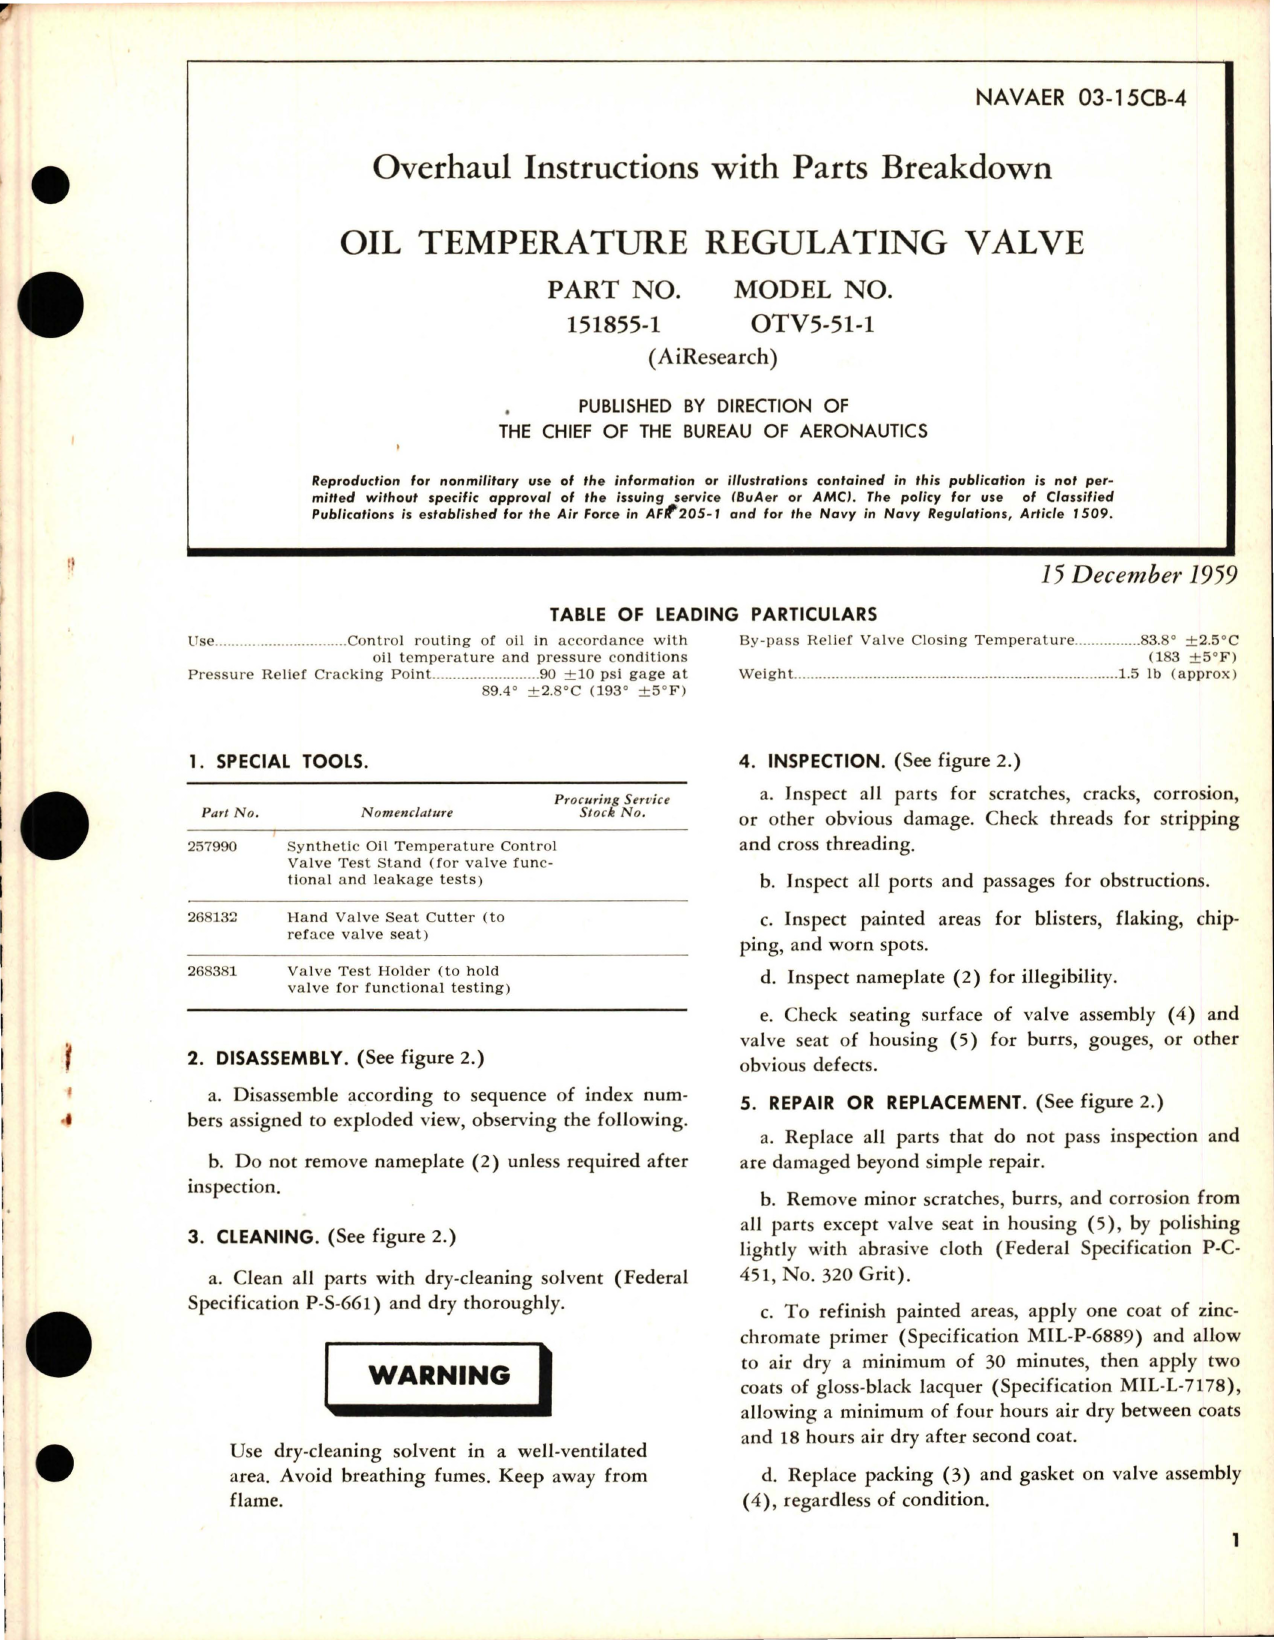 Sample page 1 from AirCorps Library document: Overhaul Instructions with Parts for Oil Temperature Regulating Valve - Part 151855-1 -  Model OTV5-51-1